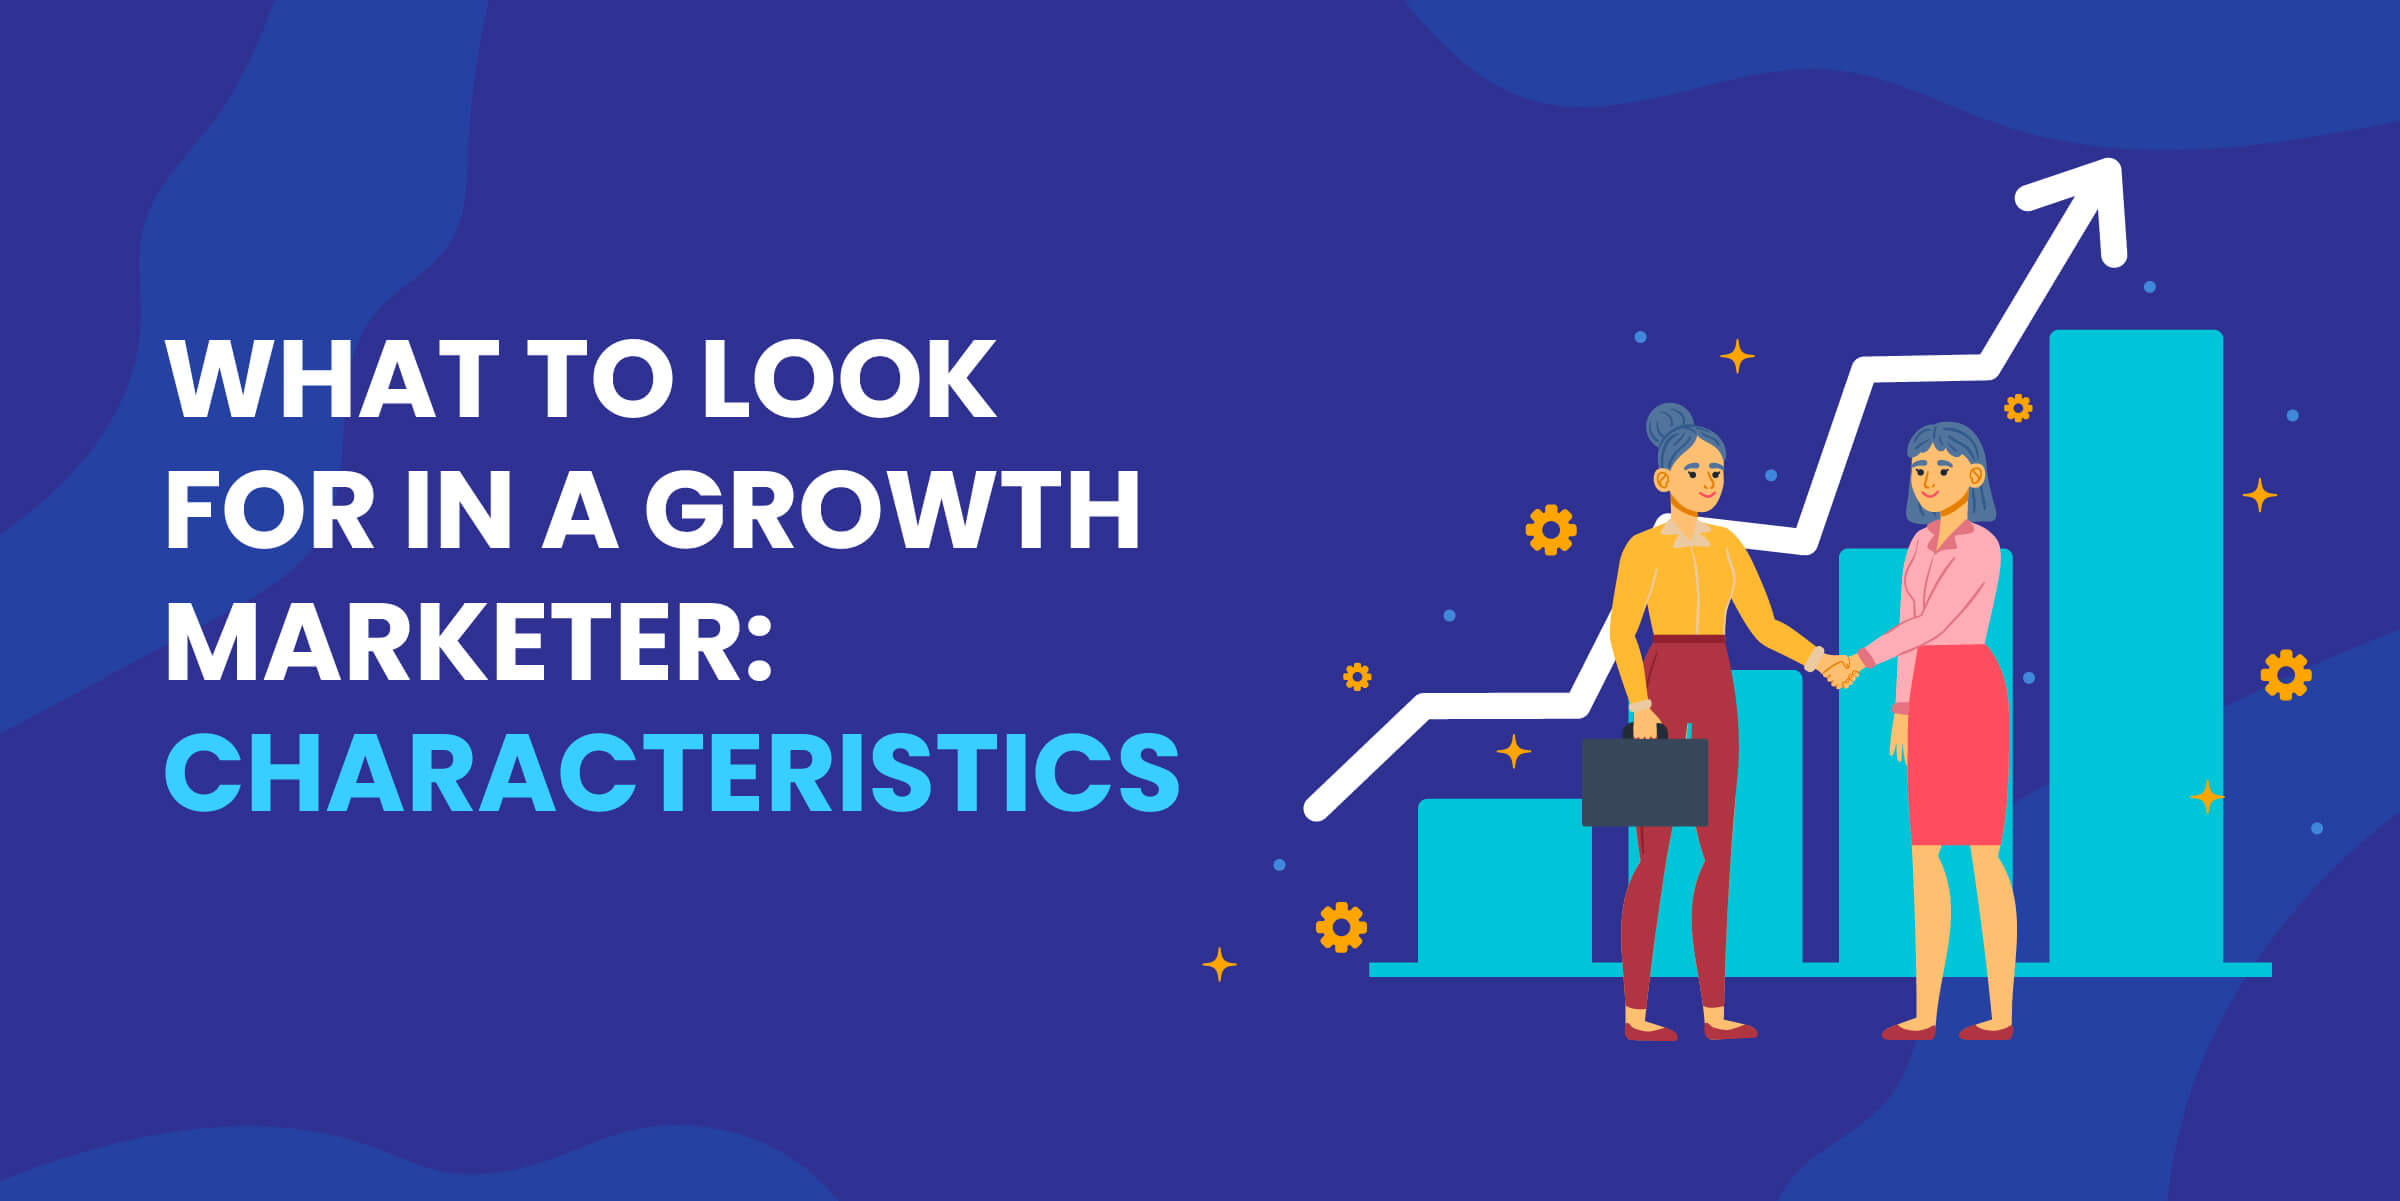 What to Look for Growth Marketer - Characteristics